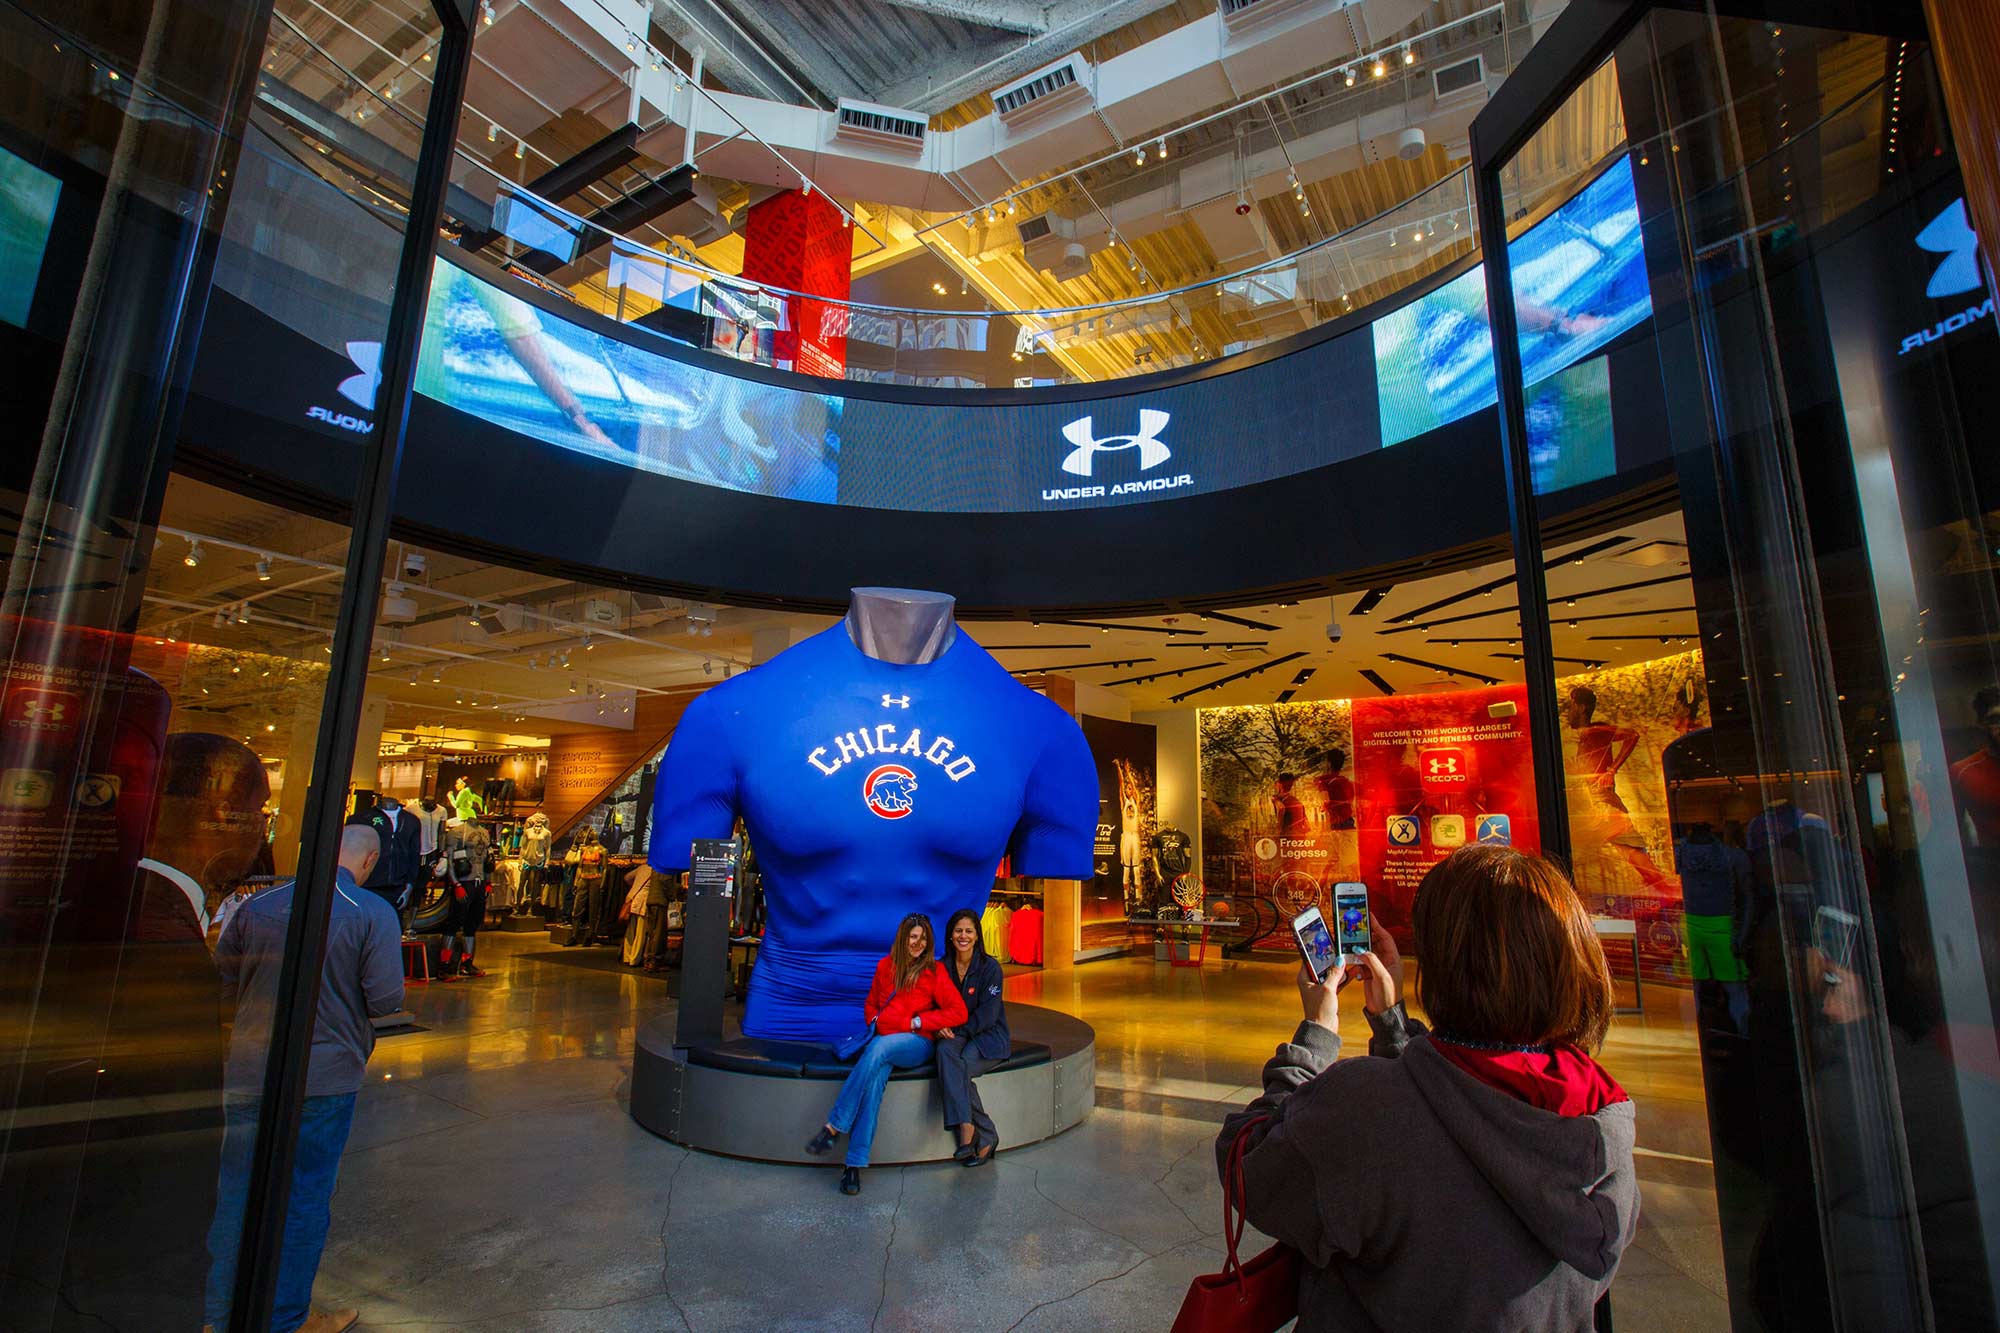 Under Armour Store, Chicago, IL - 5/13/15